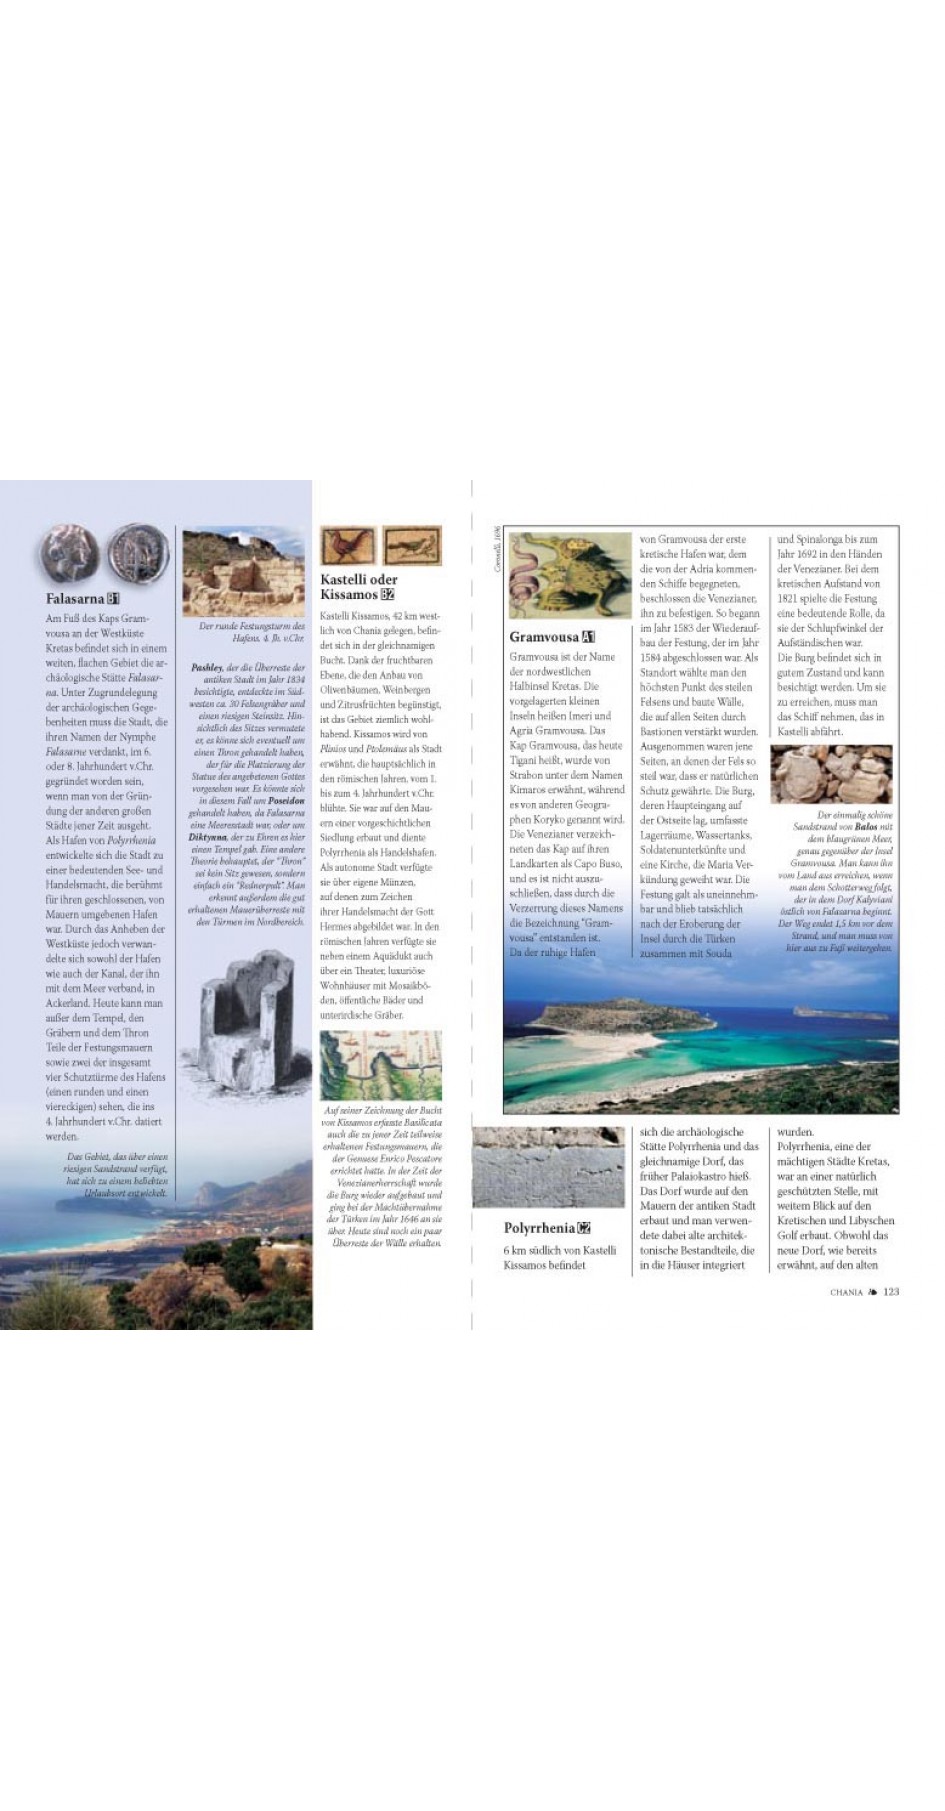 Crete : History - Sightseing - Museums - Nature - Maps (German)